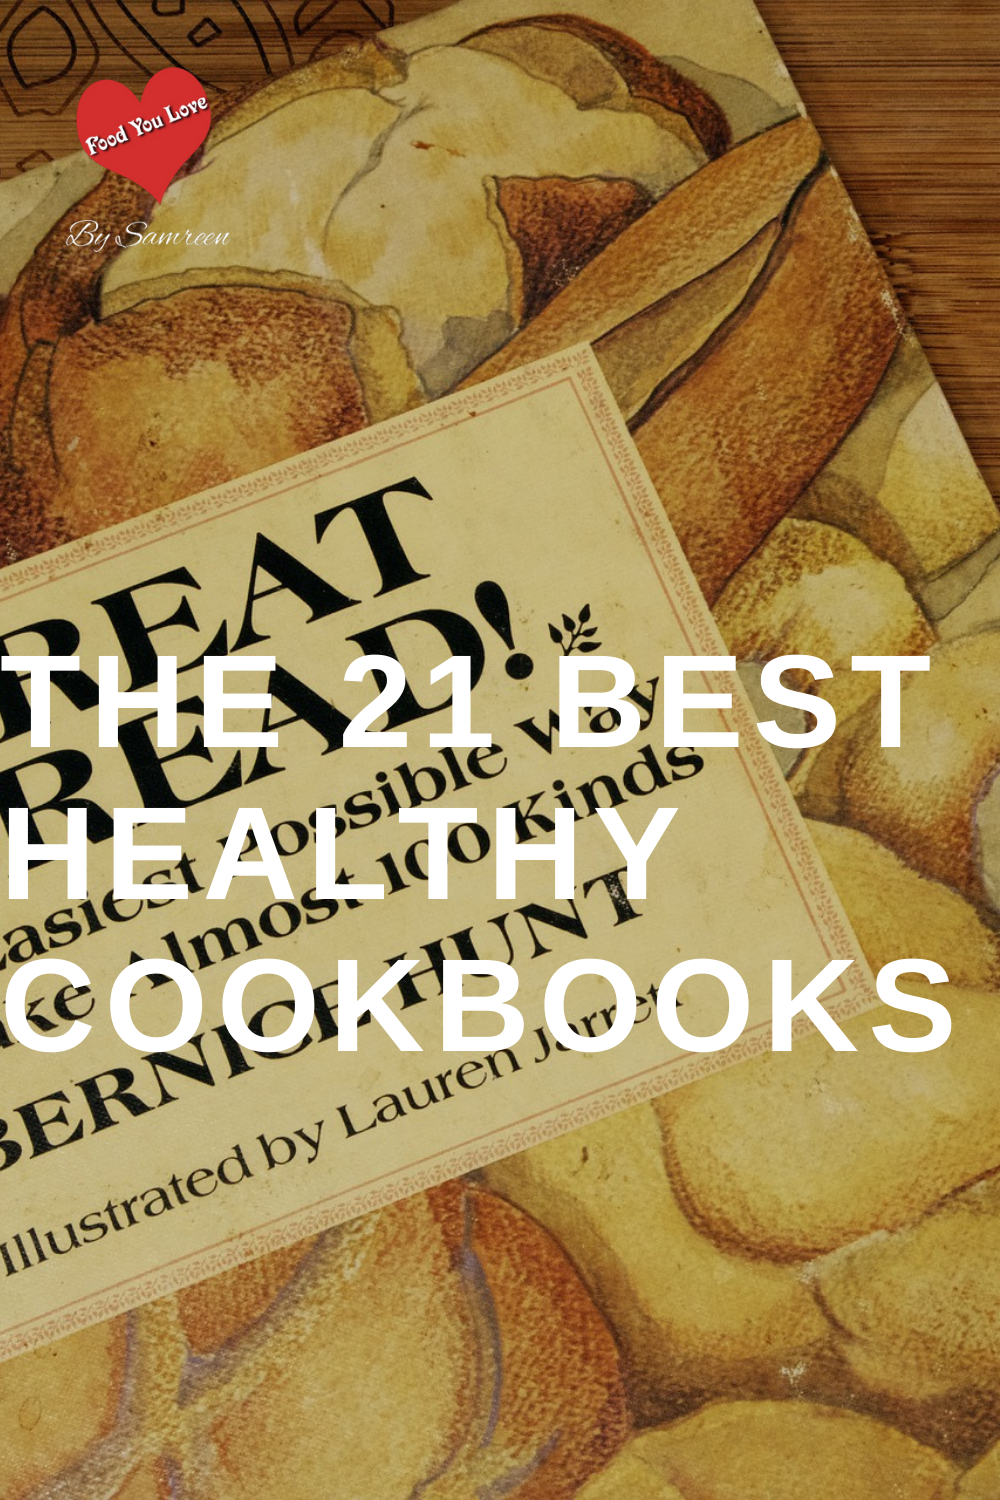 21 of the Best Healthy Cookbooks for Meal Inspiration